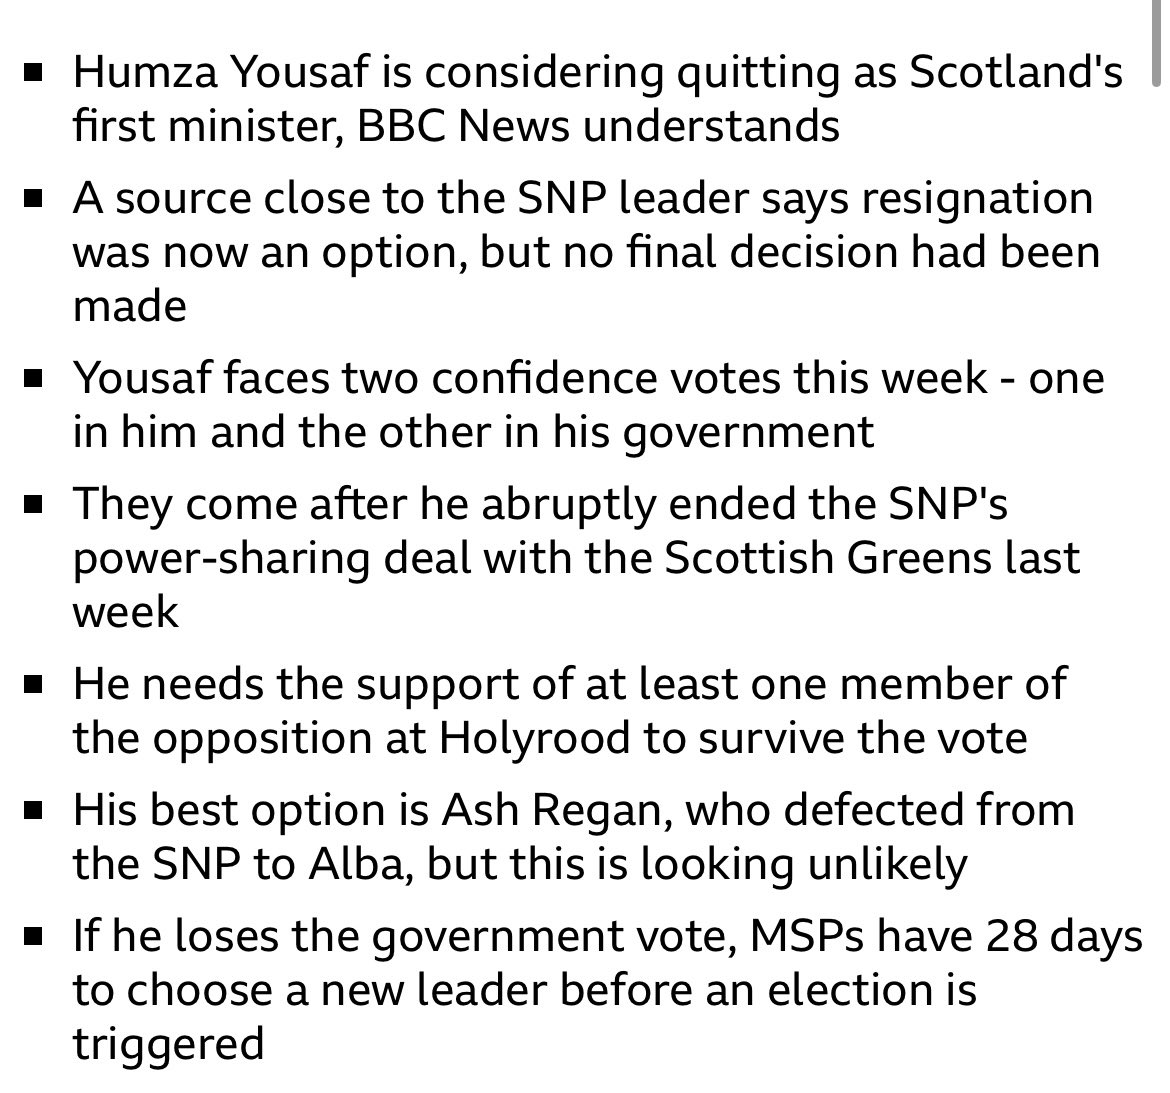 ￼ Humza Yousaf considers quitting as Scotland's first ministe - rather than face two confidence votes